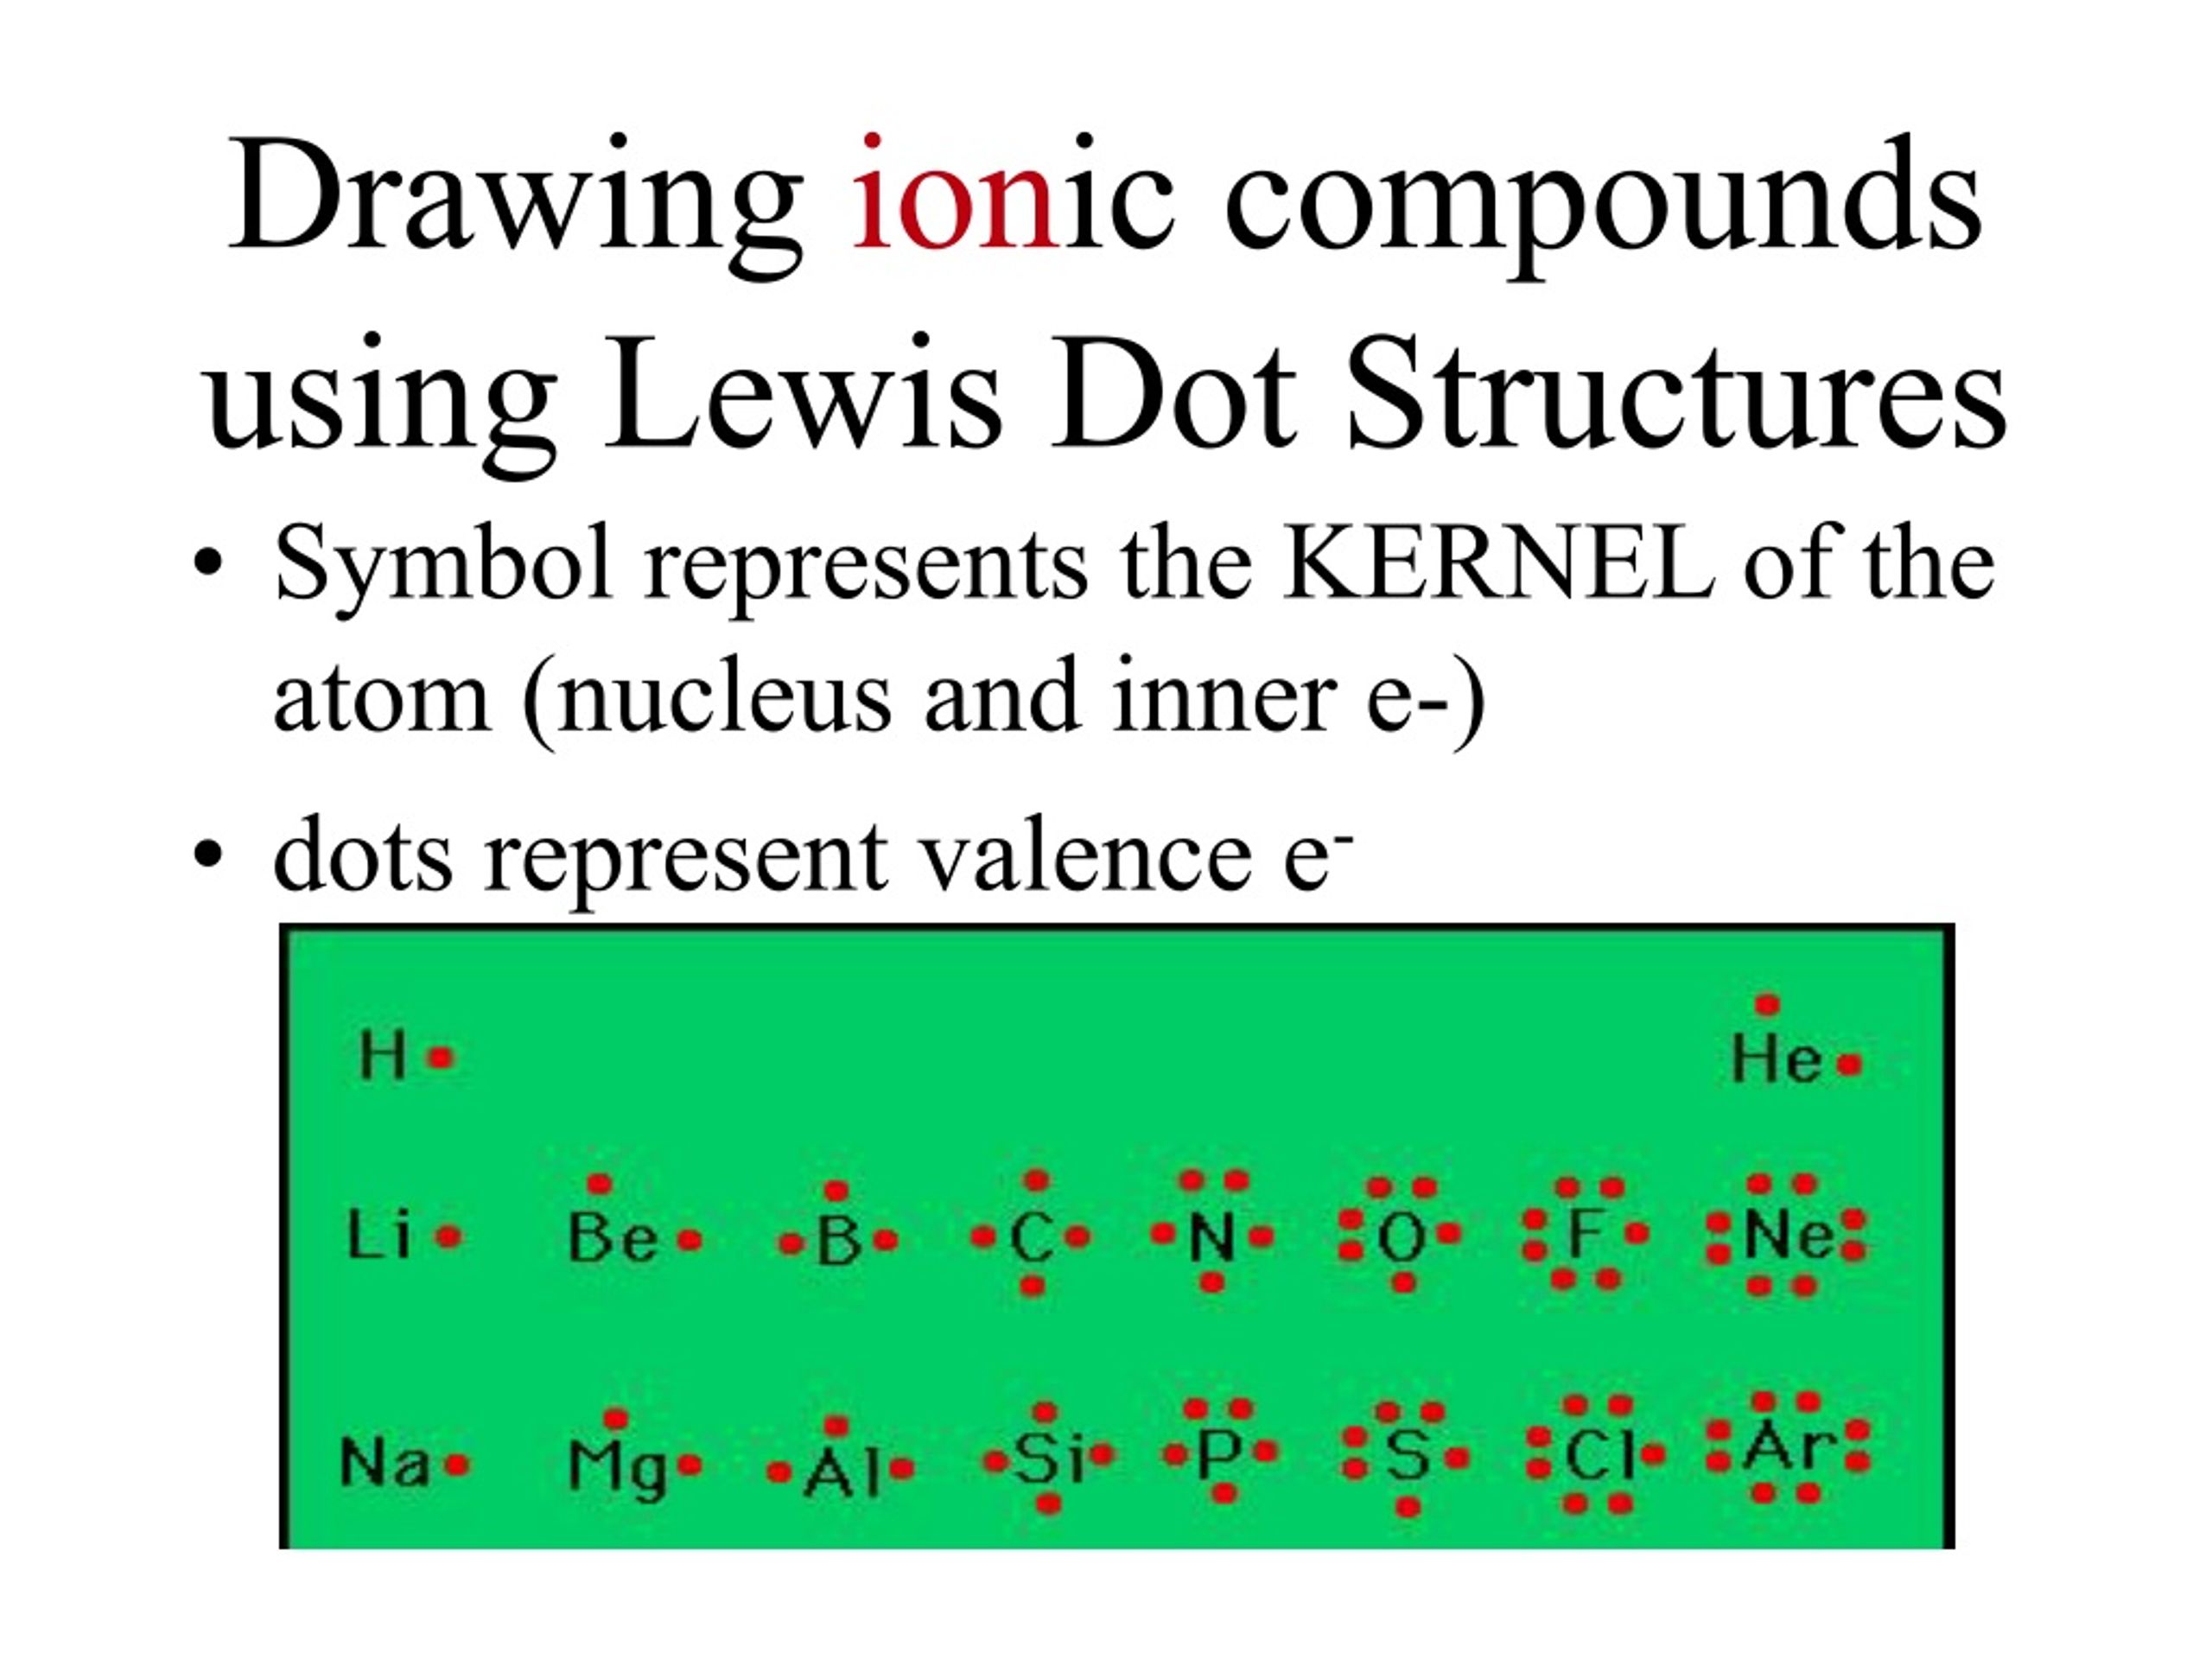 Drawing ionic compounds using Lewis Dot Structures.